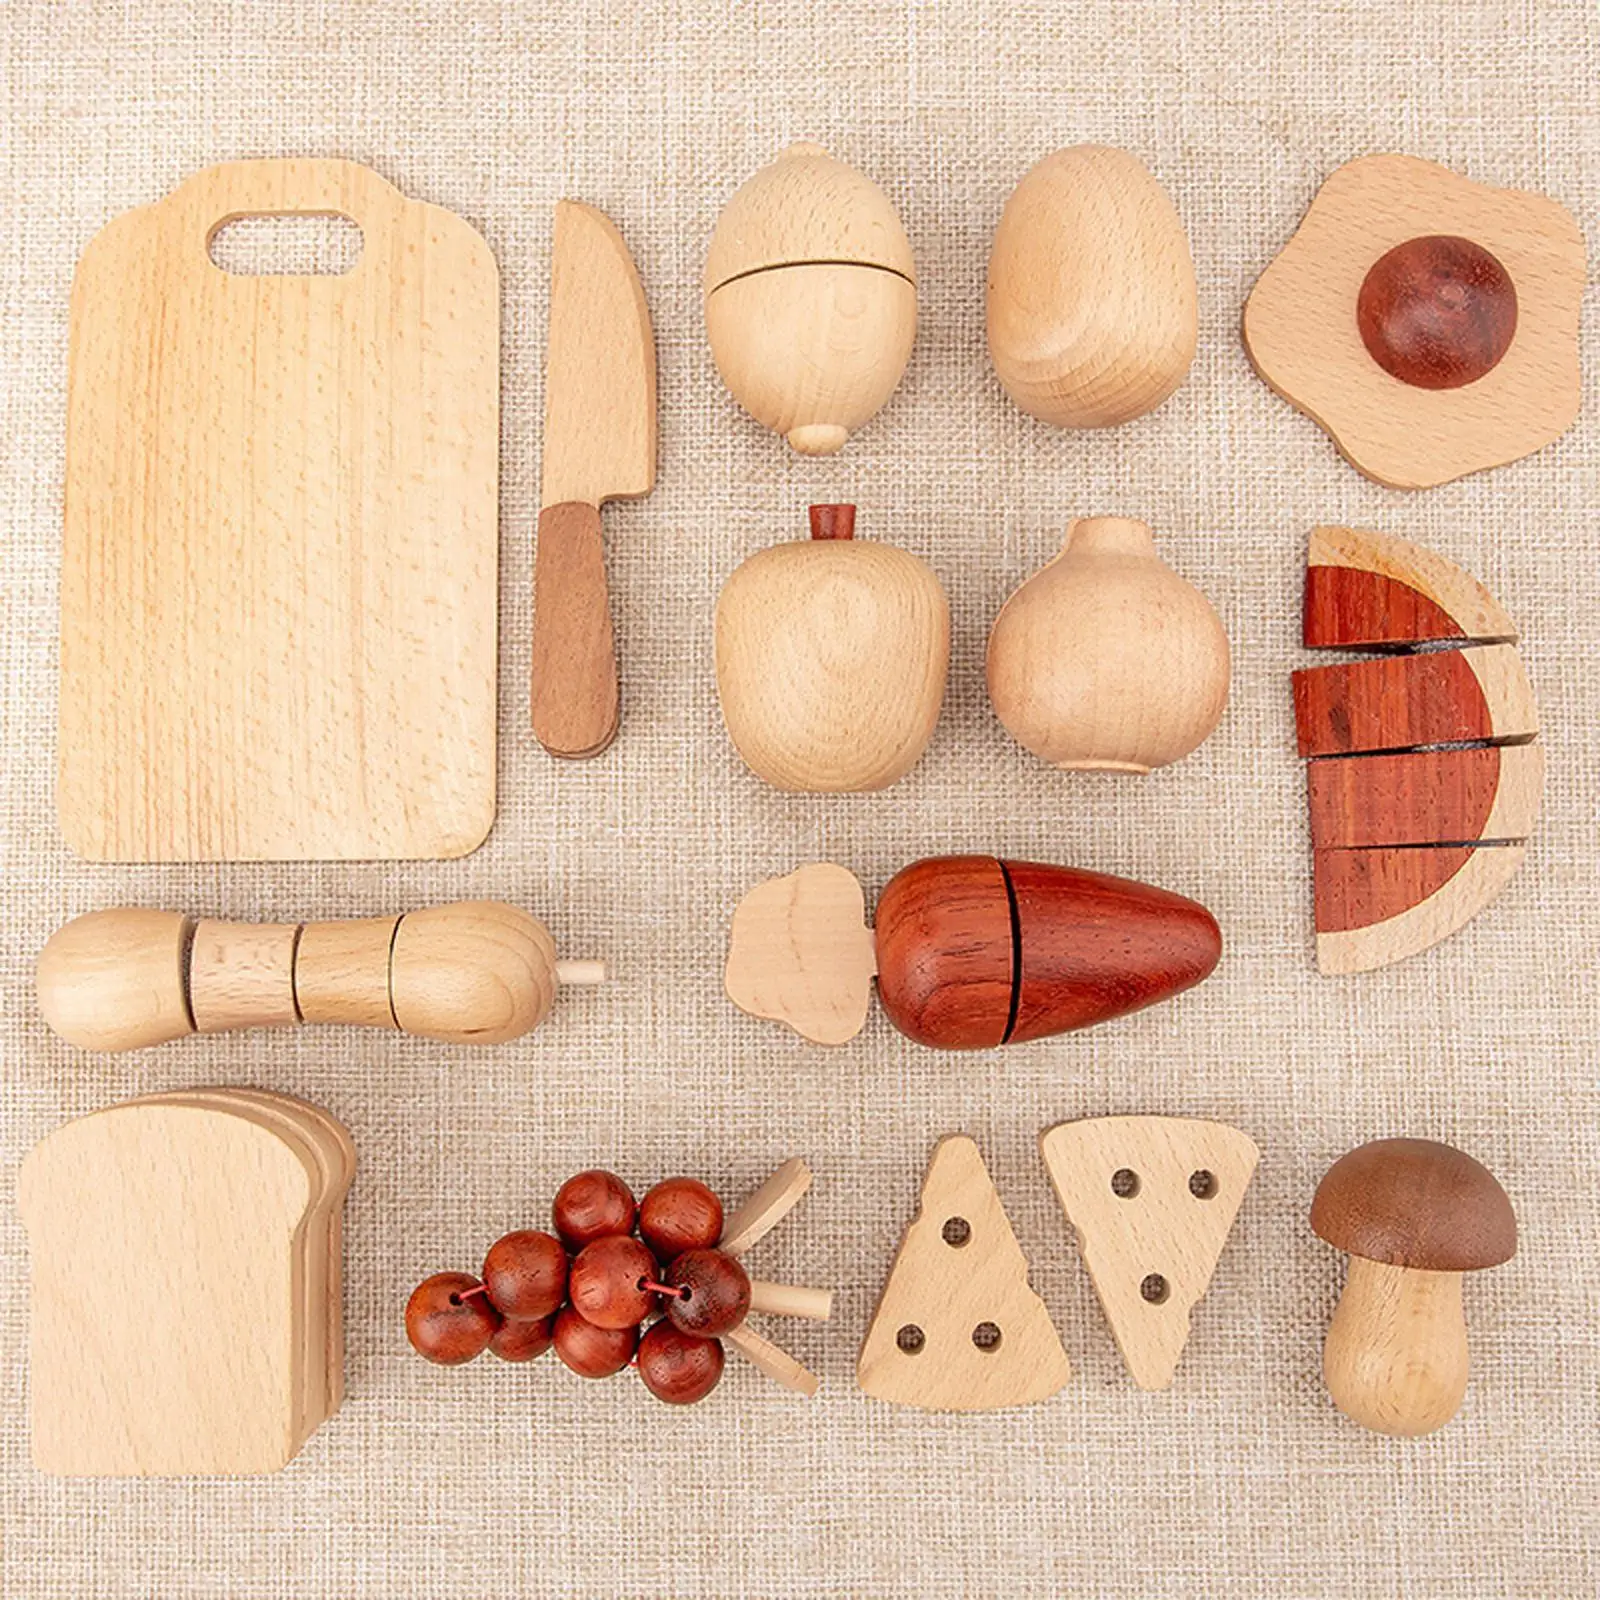 

Wooden Play Kitchen Toys Cutting Food Early Learning Cutting Fruit Vegetables for Kids Girls Children Window Display Handcraft